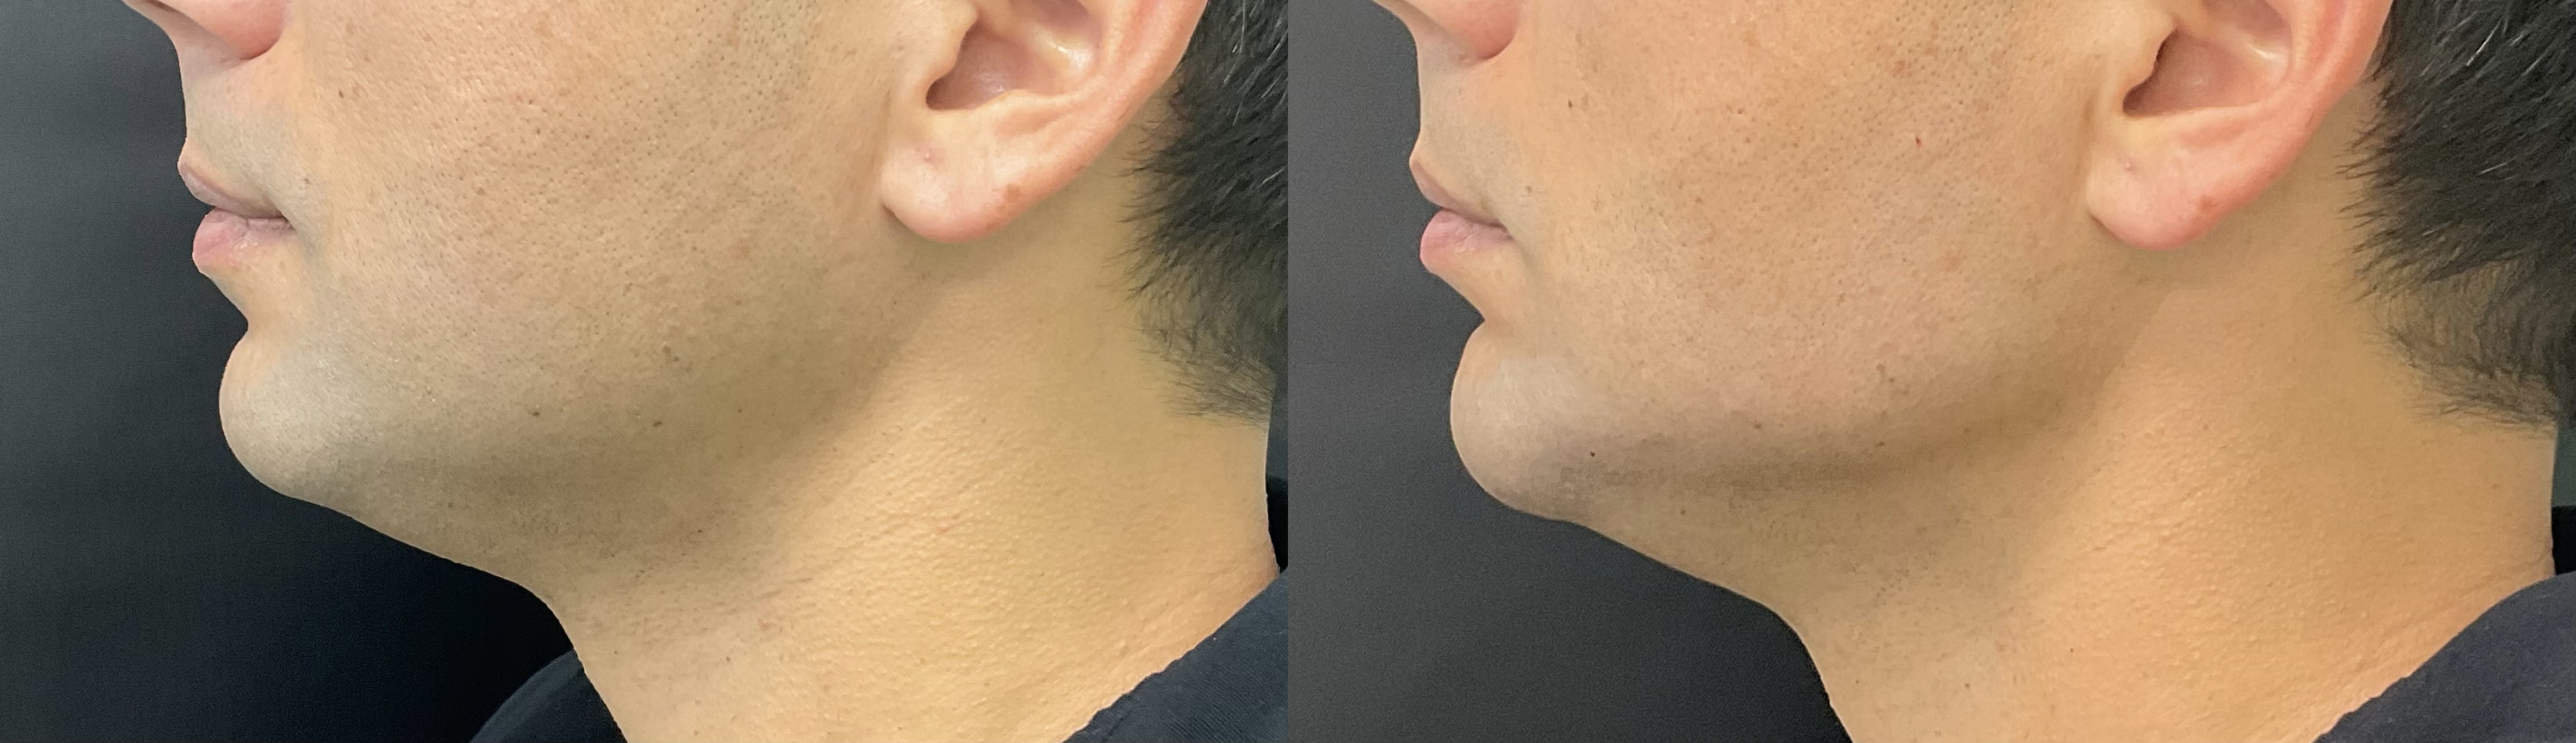 Jawline and Chin Filler- Male